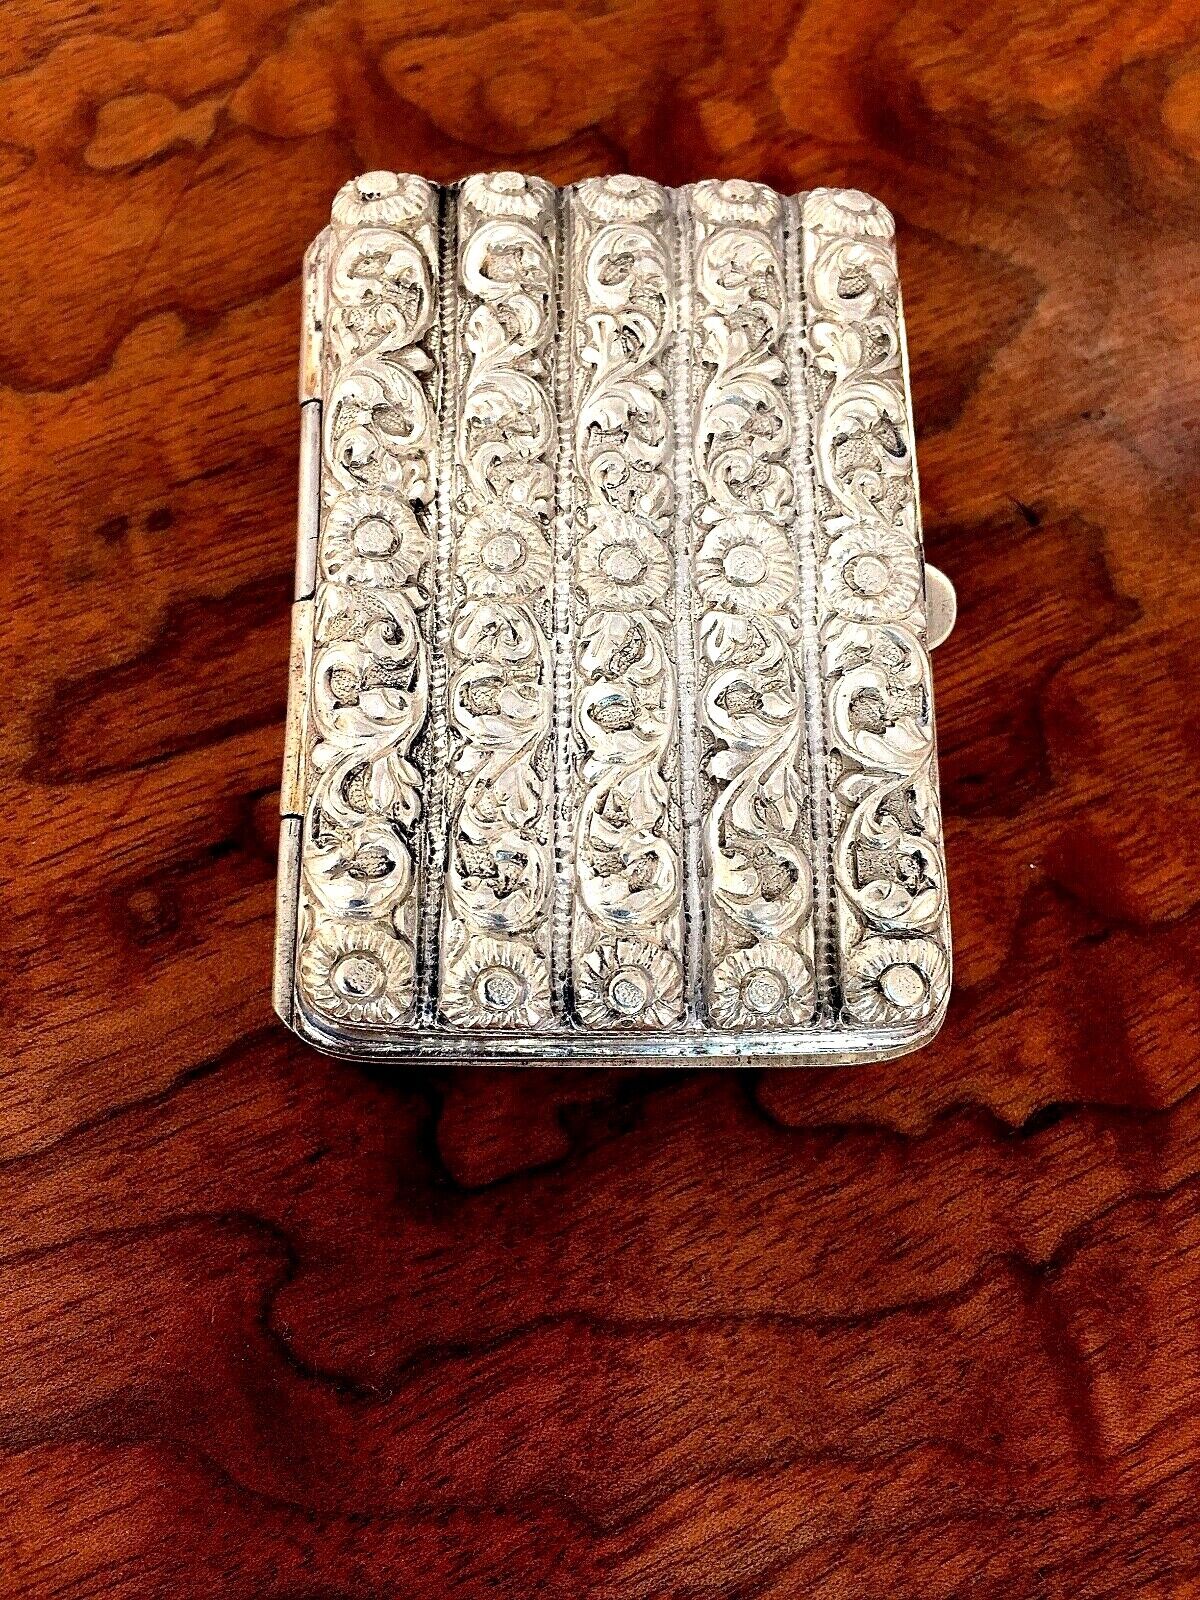 Superb Heavy Gauge Asian/Middle Eastern Silver Hinged Cheroot Case: No Monogram